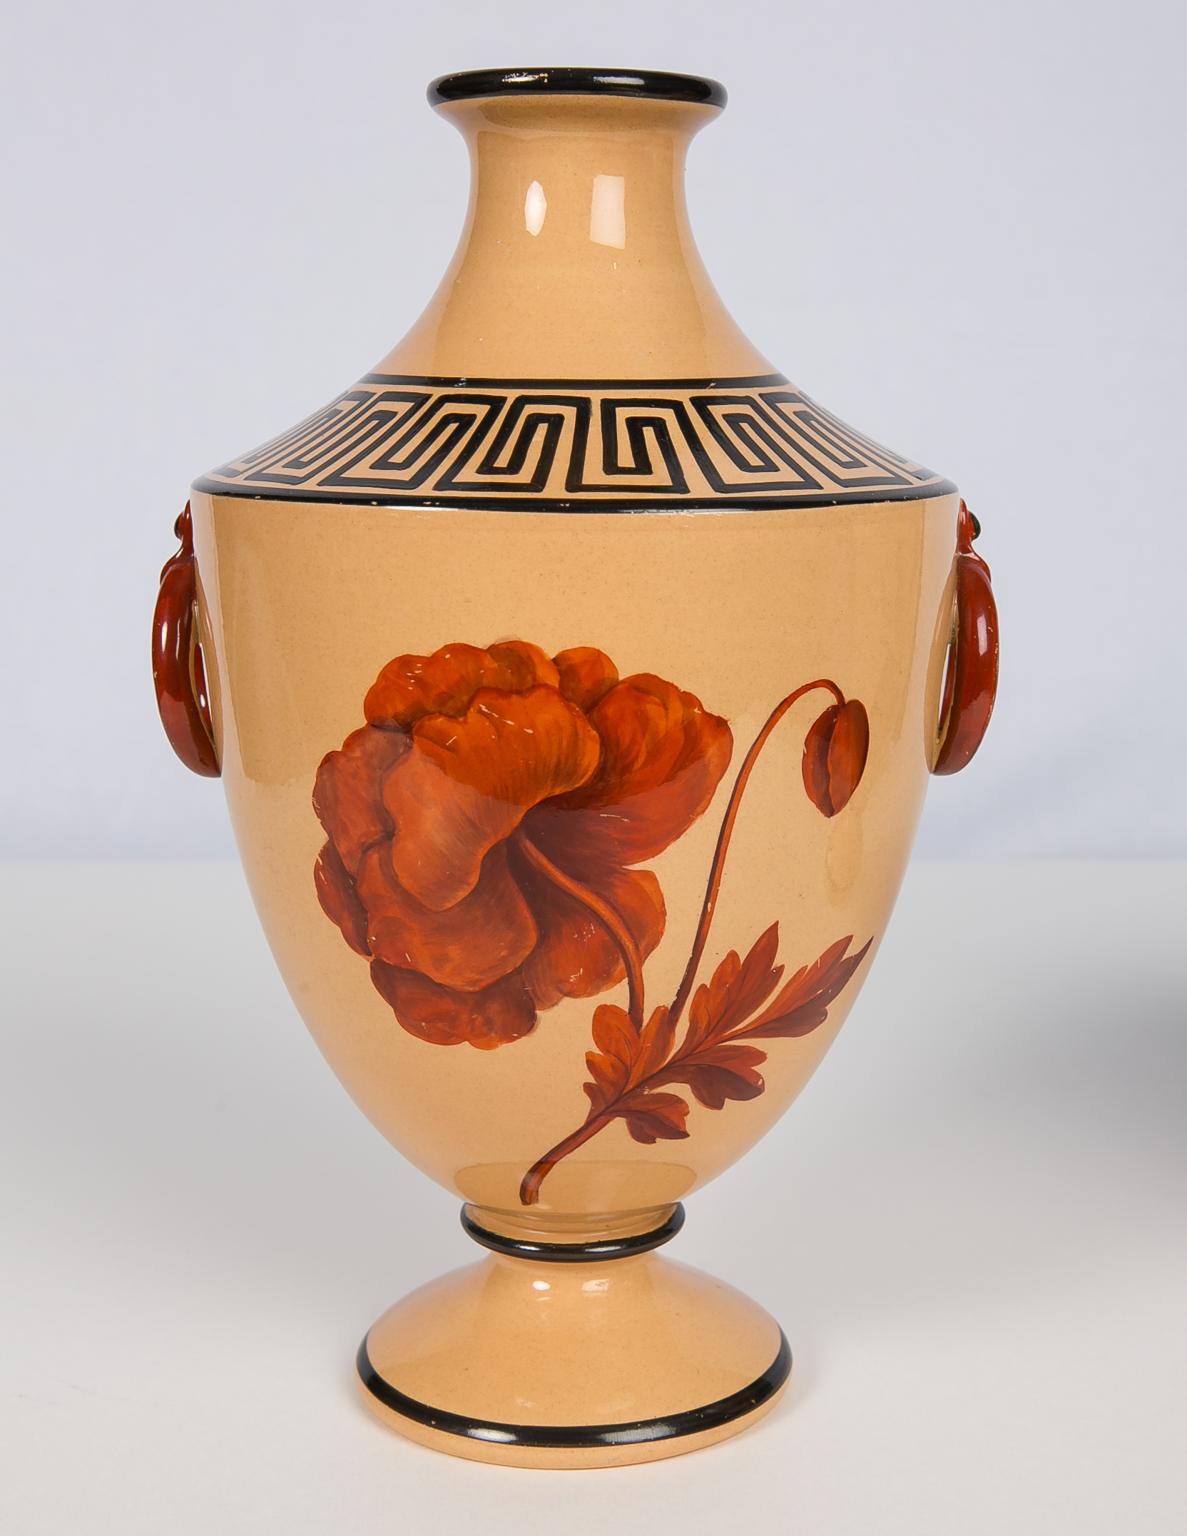 Vases with Large Red Flowers and Greek Key Decoration 5